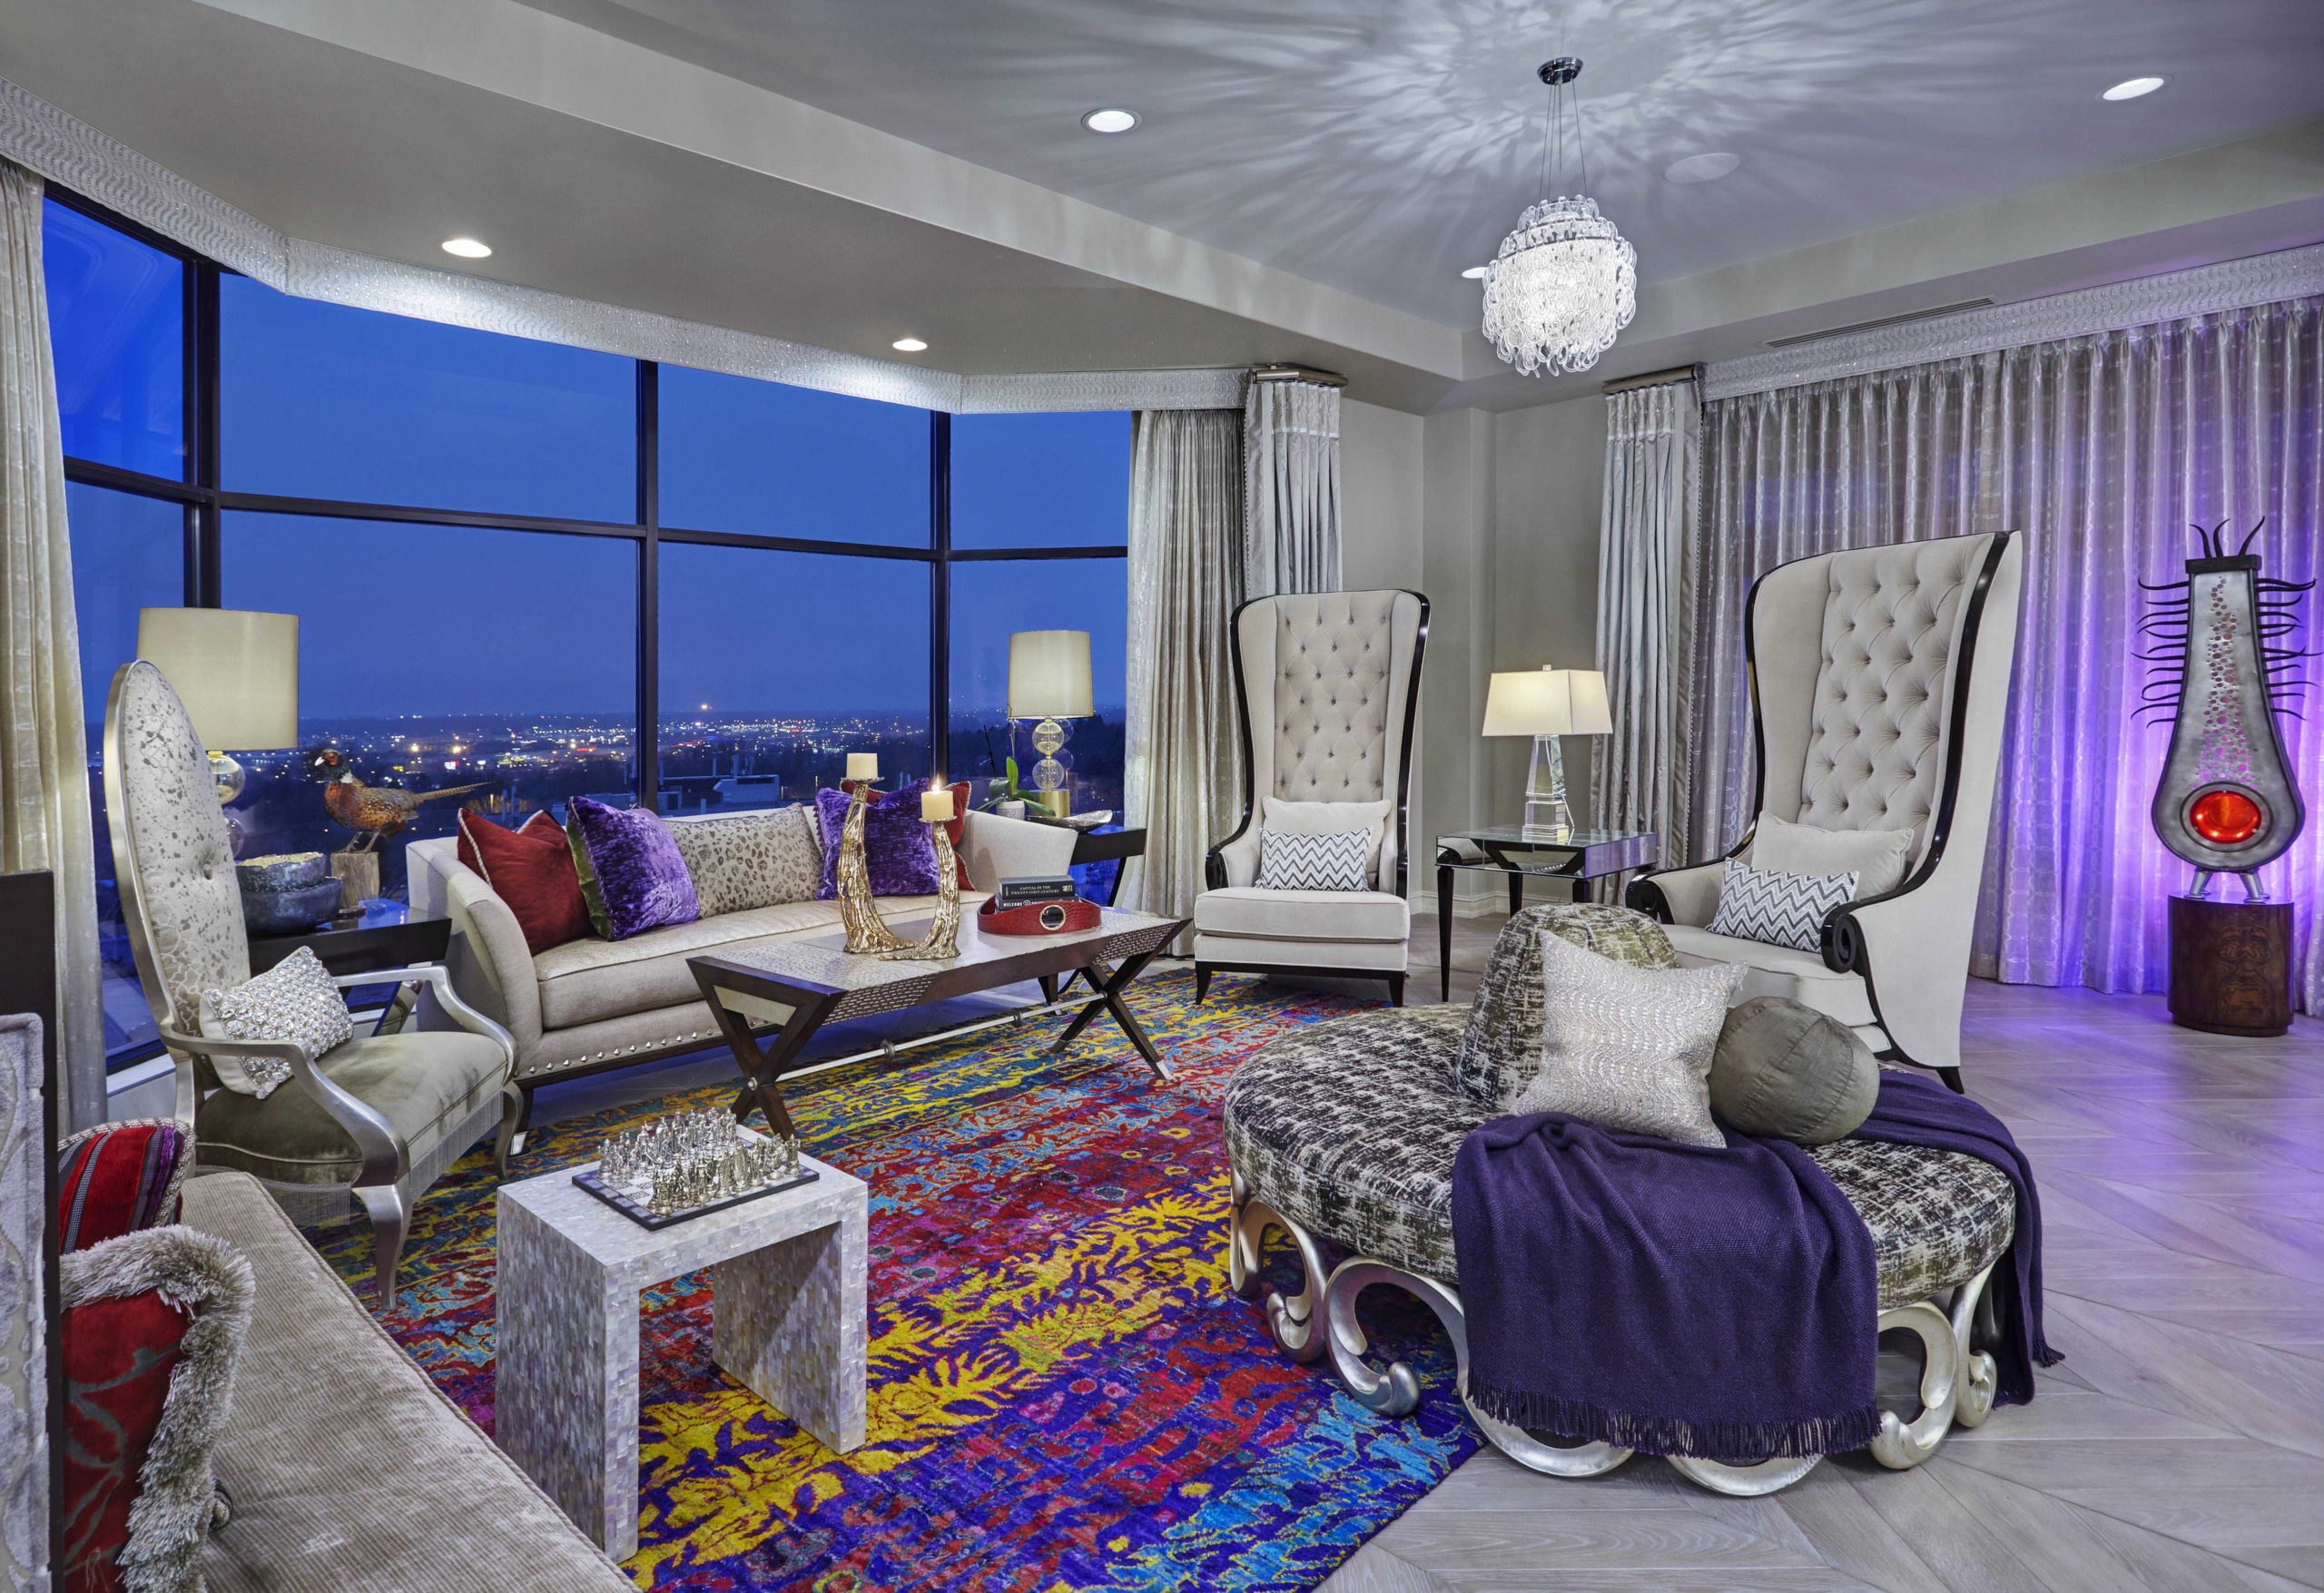 Living room overlooking a city scene with white walls, furniture and window coverings